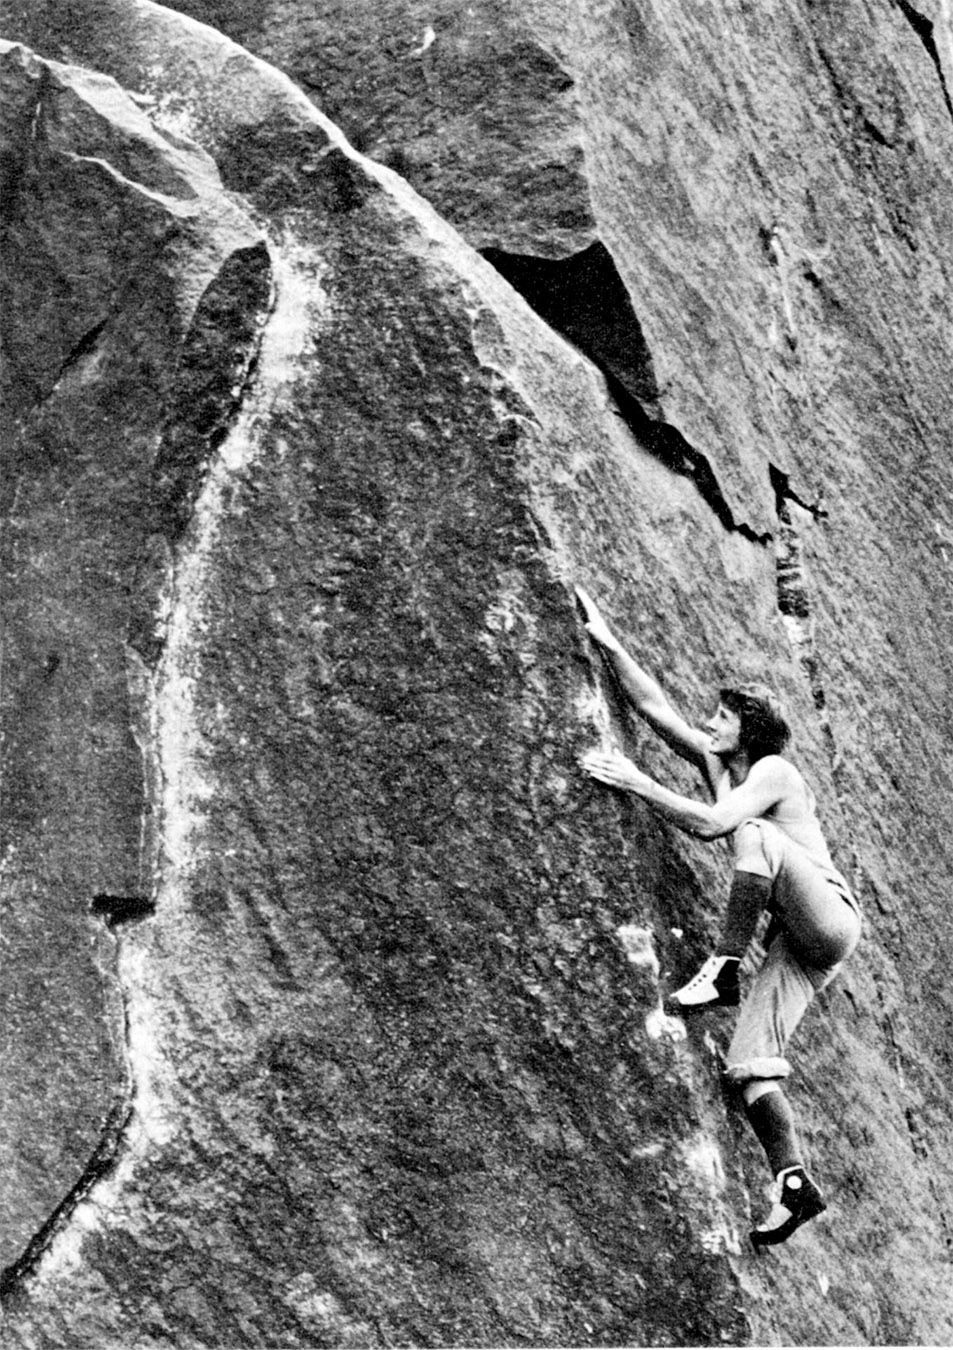 John Allen climbing Technical Master (V4) at Millstone Edge, then known as Problem Arête. Photo: © John Woodhouse and reproduced from Crags magazine